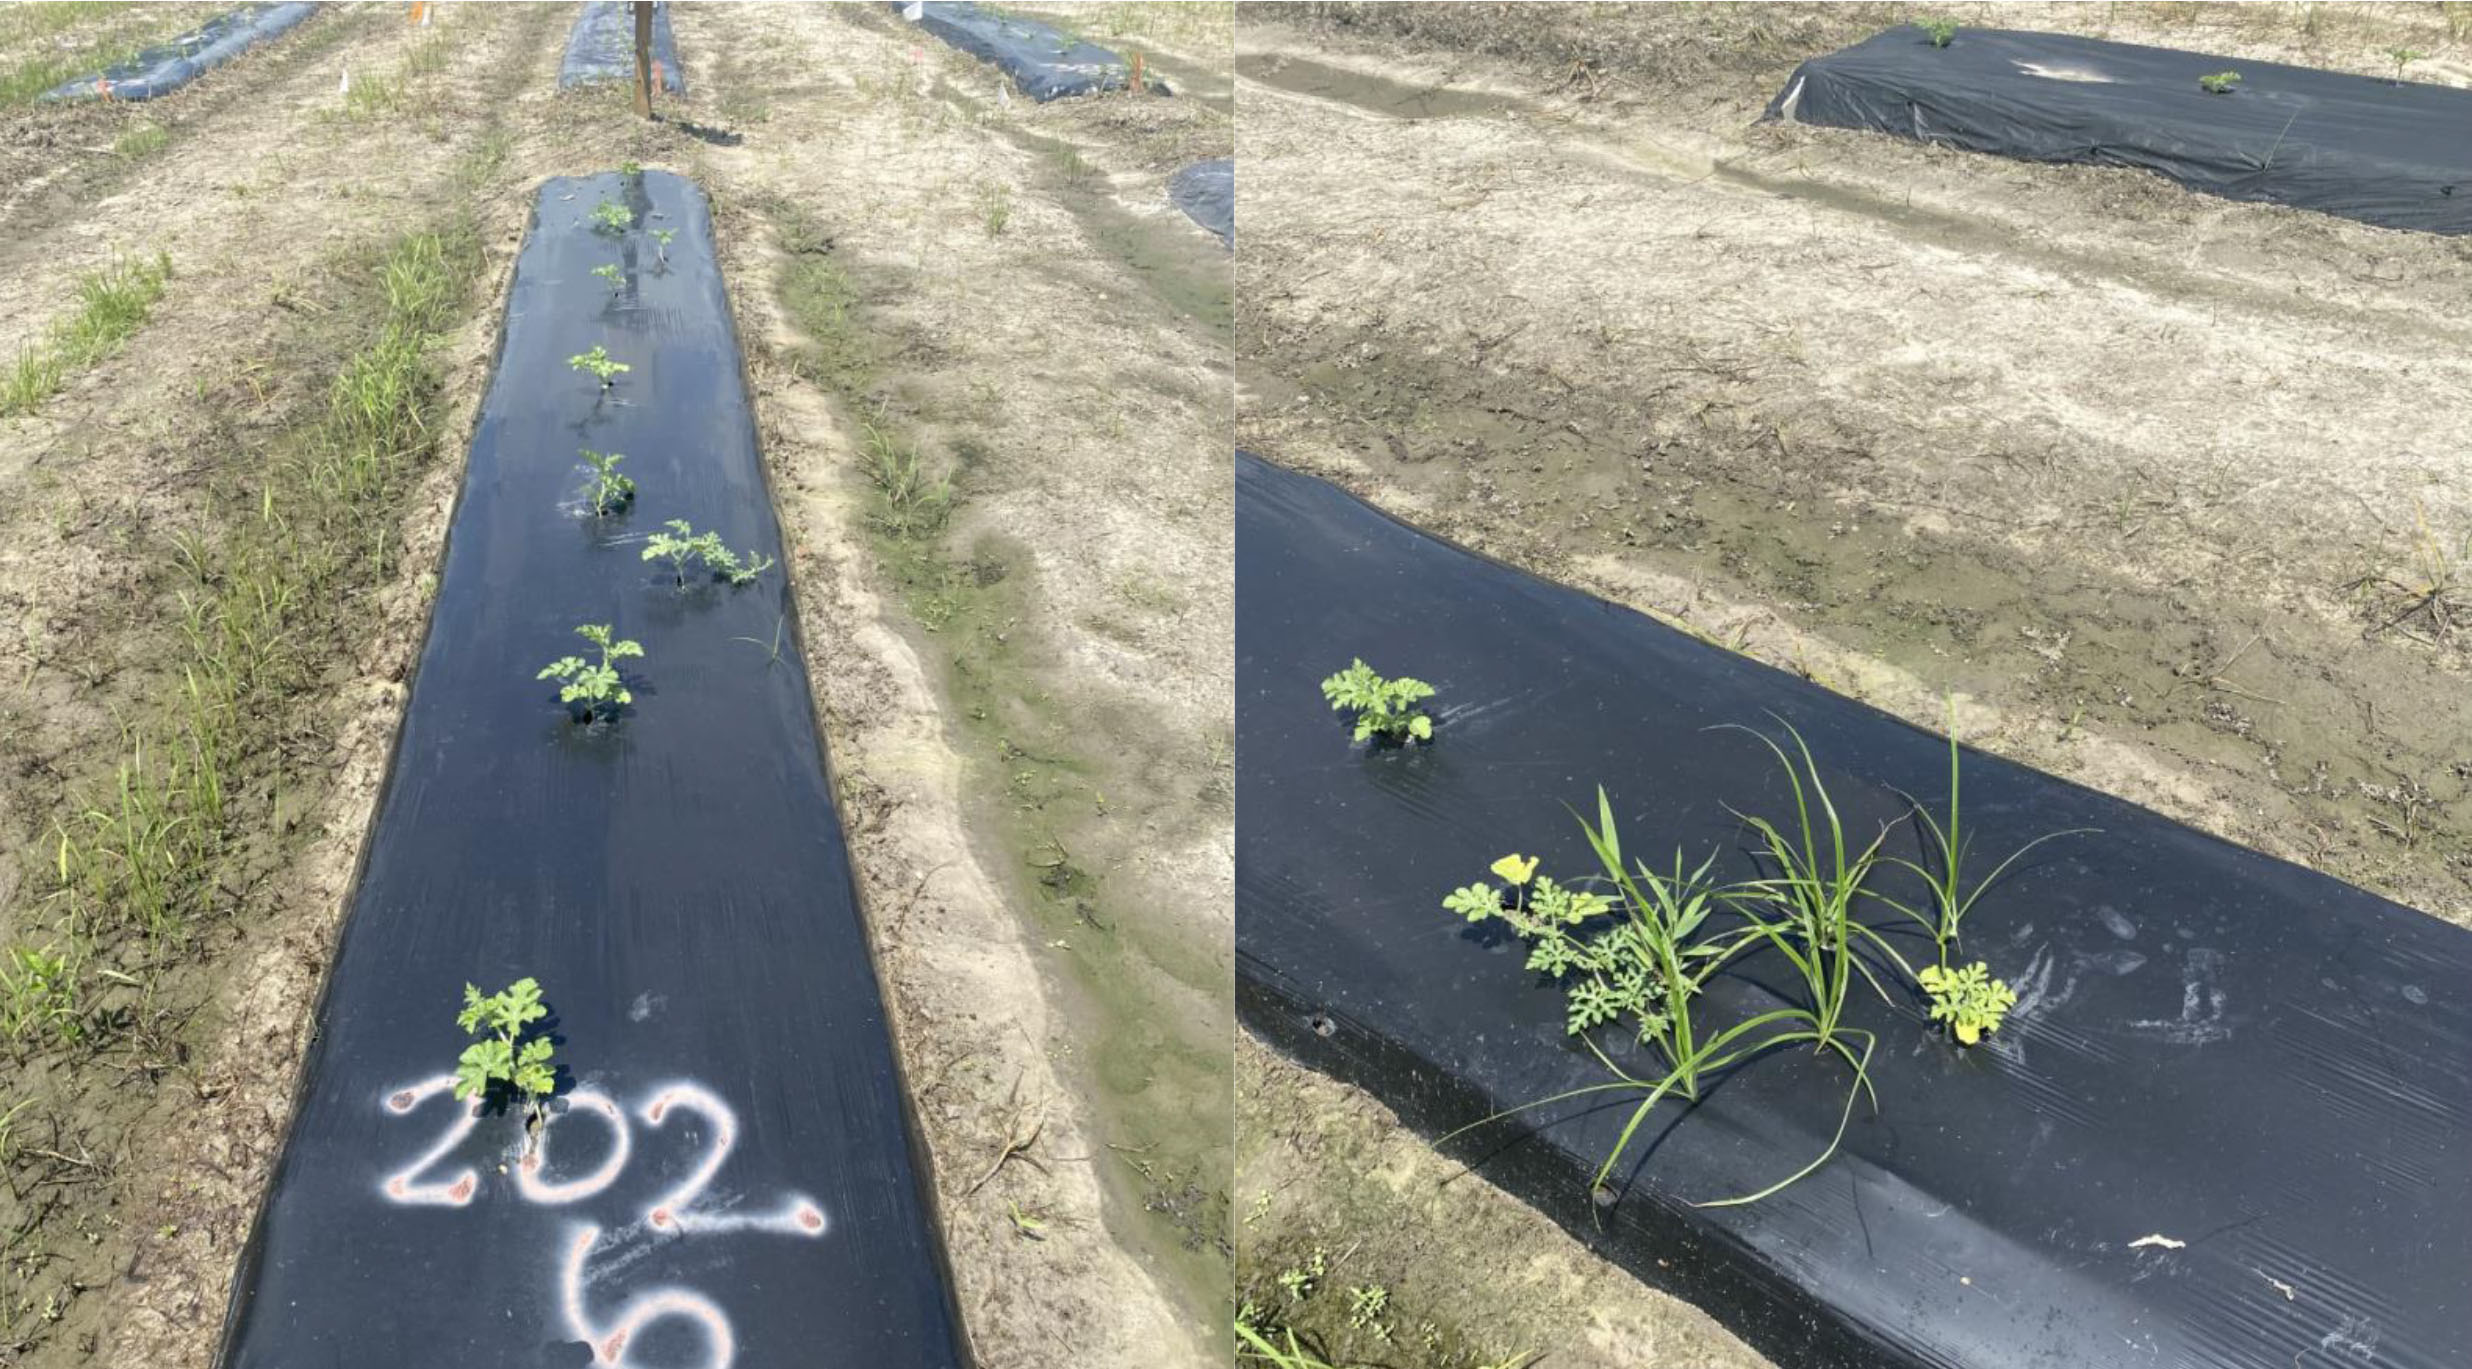 The row on the left was treated using anaerobic soil disinfestation (ASD) . The row on the right was not treated, resulting in more nutsedge growing in the crop.